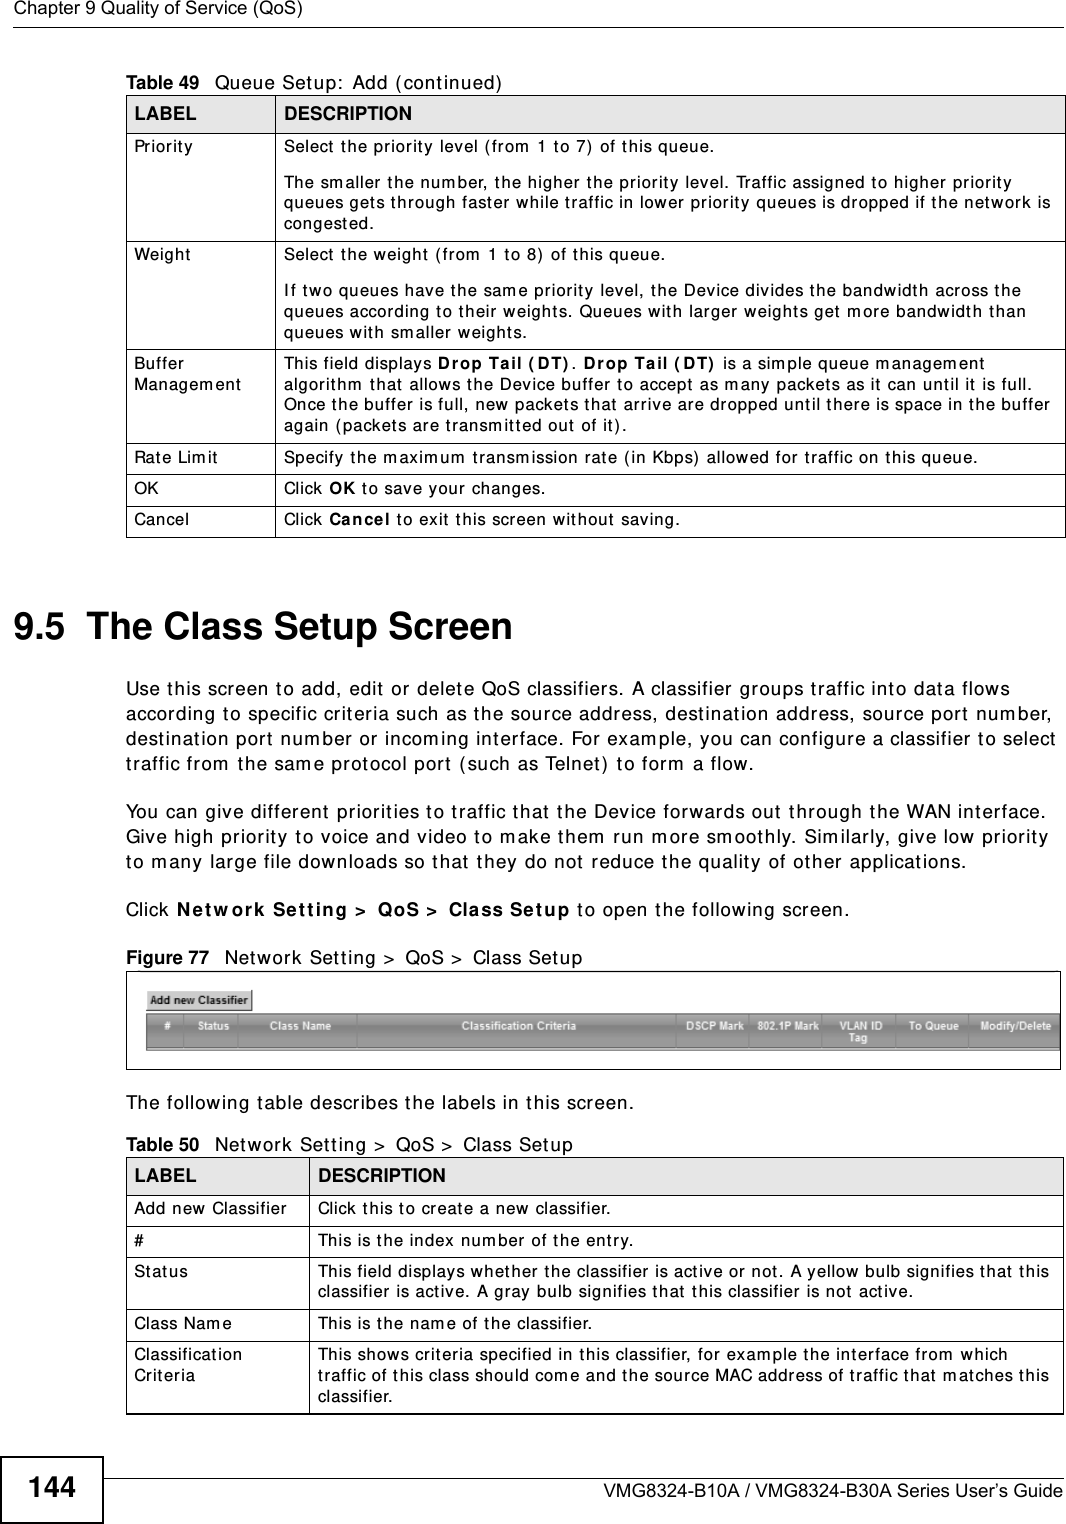 Chapter 9 Quality of Service (QoS)VMG8324-B10A / VMG8324-B30A Series User’s Guide1449.5  The Class Setup Screen Use t his screen to add, edit  or delet e QoS classifiers. A classifier groups t raffic into dat a flows according t o specific crit eria such as t he source address, destinat ion address, source port num ber, dest inat ion port  num ber or incom ing interface. For exam ple, you can configure a classifier to select  traffic from  the sam e prot ocol port ( such as Telnet )  to form  a flow.You can give different  priorit ies to traffic t hat  t he Device forwar ds out t hrough t he WAN int er face. Give high priority t o voice and video to m ake t hem  run m ore sm oot hly. Sim ilarly, give low priorit y to m any large file downloads so t hat  they do not  reduce the qualit y of ot her applicat ions. Click N et w ork  Se t t ing &gt;  QoS &gt;  Cla ss Se t up to open the following screen.Figure 77   Net work Set t ing &gt;  QoS &gt;  Class Setup The following t able describes t he labels in this screen.  Priority Select the priority level ( from  1 t o 7) of this queue.The sm aller  t he num ber, t he higher the priorit y  level. Traffic assigned t o higher  priorit y queues gets through fast er while t raffic in lower priority queues is dropped if the networ k is congest ed.Weig h t Select  t he weight ( from  1 to 8)  of t his queue. I f t wo queues have t he sam e priorit y level, t he Device div ides t he bandwidth across the queues according t o t heir w eights. Queues wit h larger weights get m ore bandwidt h t han queues wit h sm aller w eights.Buffer Managem entThis field displays Drop Ta il ( DT) . Dr op Ta il ( D T)  is a sim ple queue m anagem ent algorit hm  t hat  allows t he Dev ice buffer  t o accept  as m any packets as it  can unt il it  is full. Once t he buffer is full, new packets t hat  arrive are dropped until t here is space in the buffer again ( packet s are t ransm it t ed out of it ) . Rat e Lim it Specify t he m axim um  t ransm ission rat e ( in Kbps)  allow ed for t raffic on this queue.OK Click OK t o save your changes.Cancel Click Ca nce l to exit t his screen without  saving.Table 49   Queue Setup:  Add ( cont inued)LABEL DESCRIPTIONTable 50   Net work Sett ing &gt;  QoS &gt;  Class Set upLABEL DESCRIPTIONAdd new Classifier Click this t o create a new classifier.#This is t he index  num ber of t he entry.St atus This field display s whet her  t h e classif ier  is act ive or not . A y ellow  bulb sign ifies t h at  t his classifier is act iv e. A gray bulb signifies that  t his classifier  is not  act iv e.Class Nam e This is t he nam e of t he classifier.Classification CriteriaThis show s crit er ia specified in t his classifier, for exam ple t he int erface from  which traffic of t his class should com e and t he source MAC address of t raffic that  m at ches this classifier.